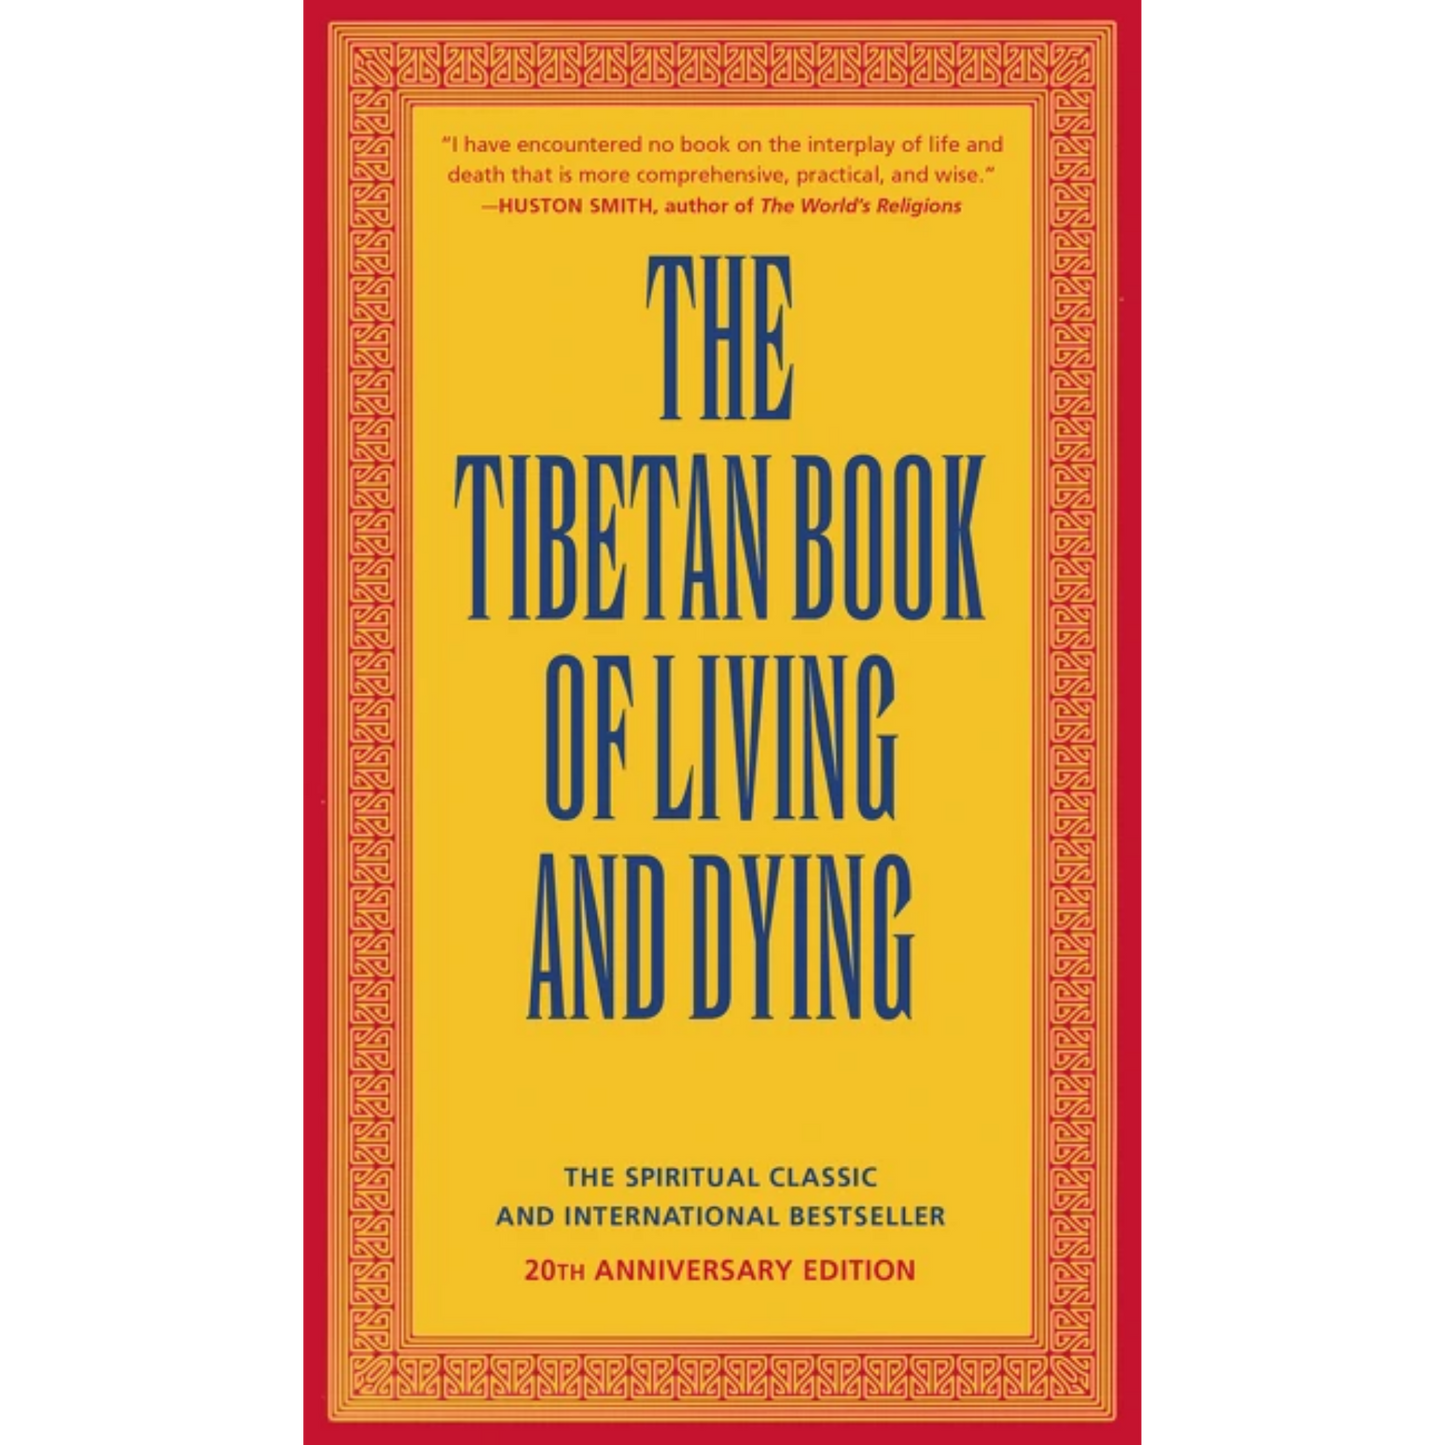 the tibetan book of living and dying sogyal rinpoche